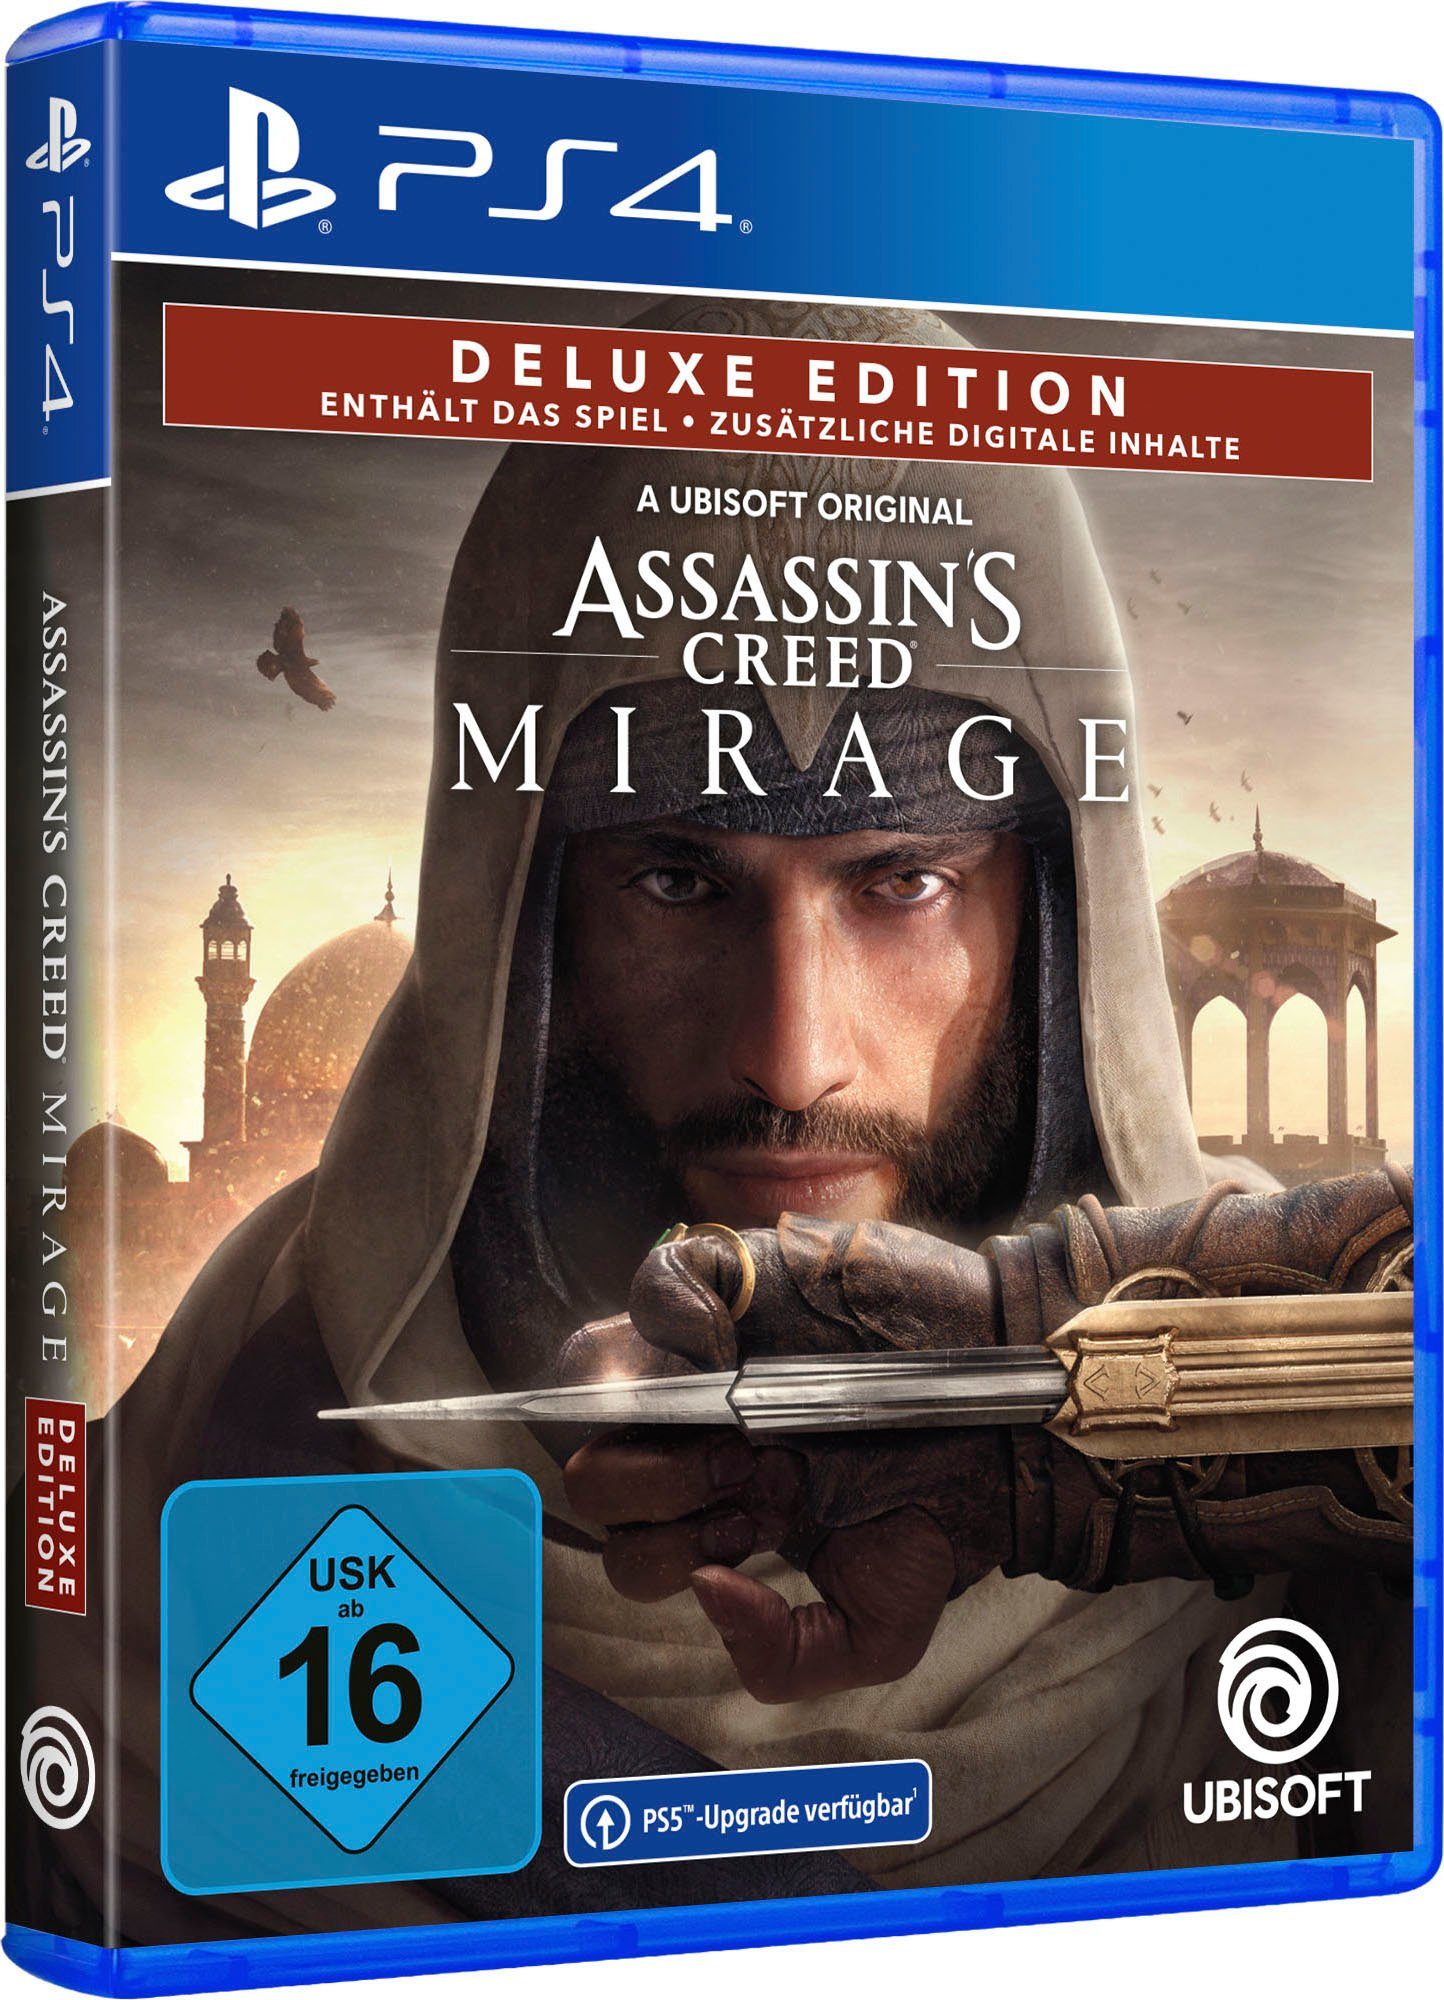 UBISOFT Assassin's Creed Mirage Deluxe Edition - (kostenloses Upgrade auf PS5) PlayStation 4 | PS4-Spiele